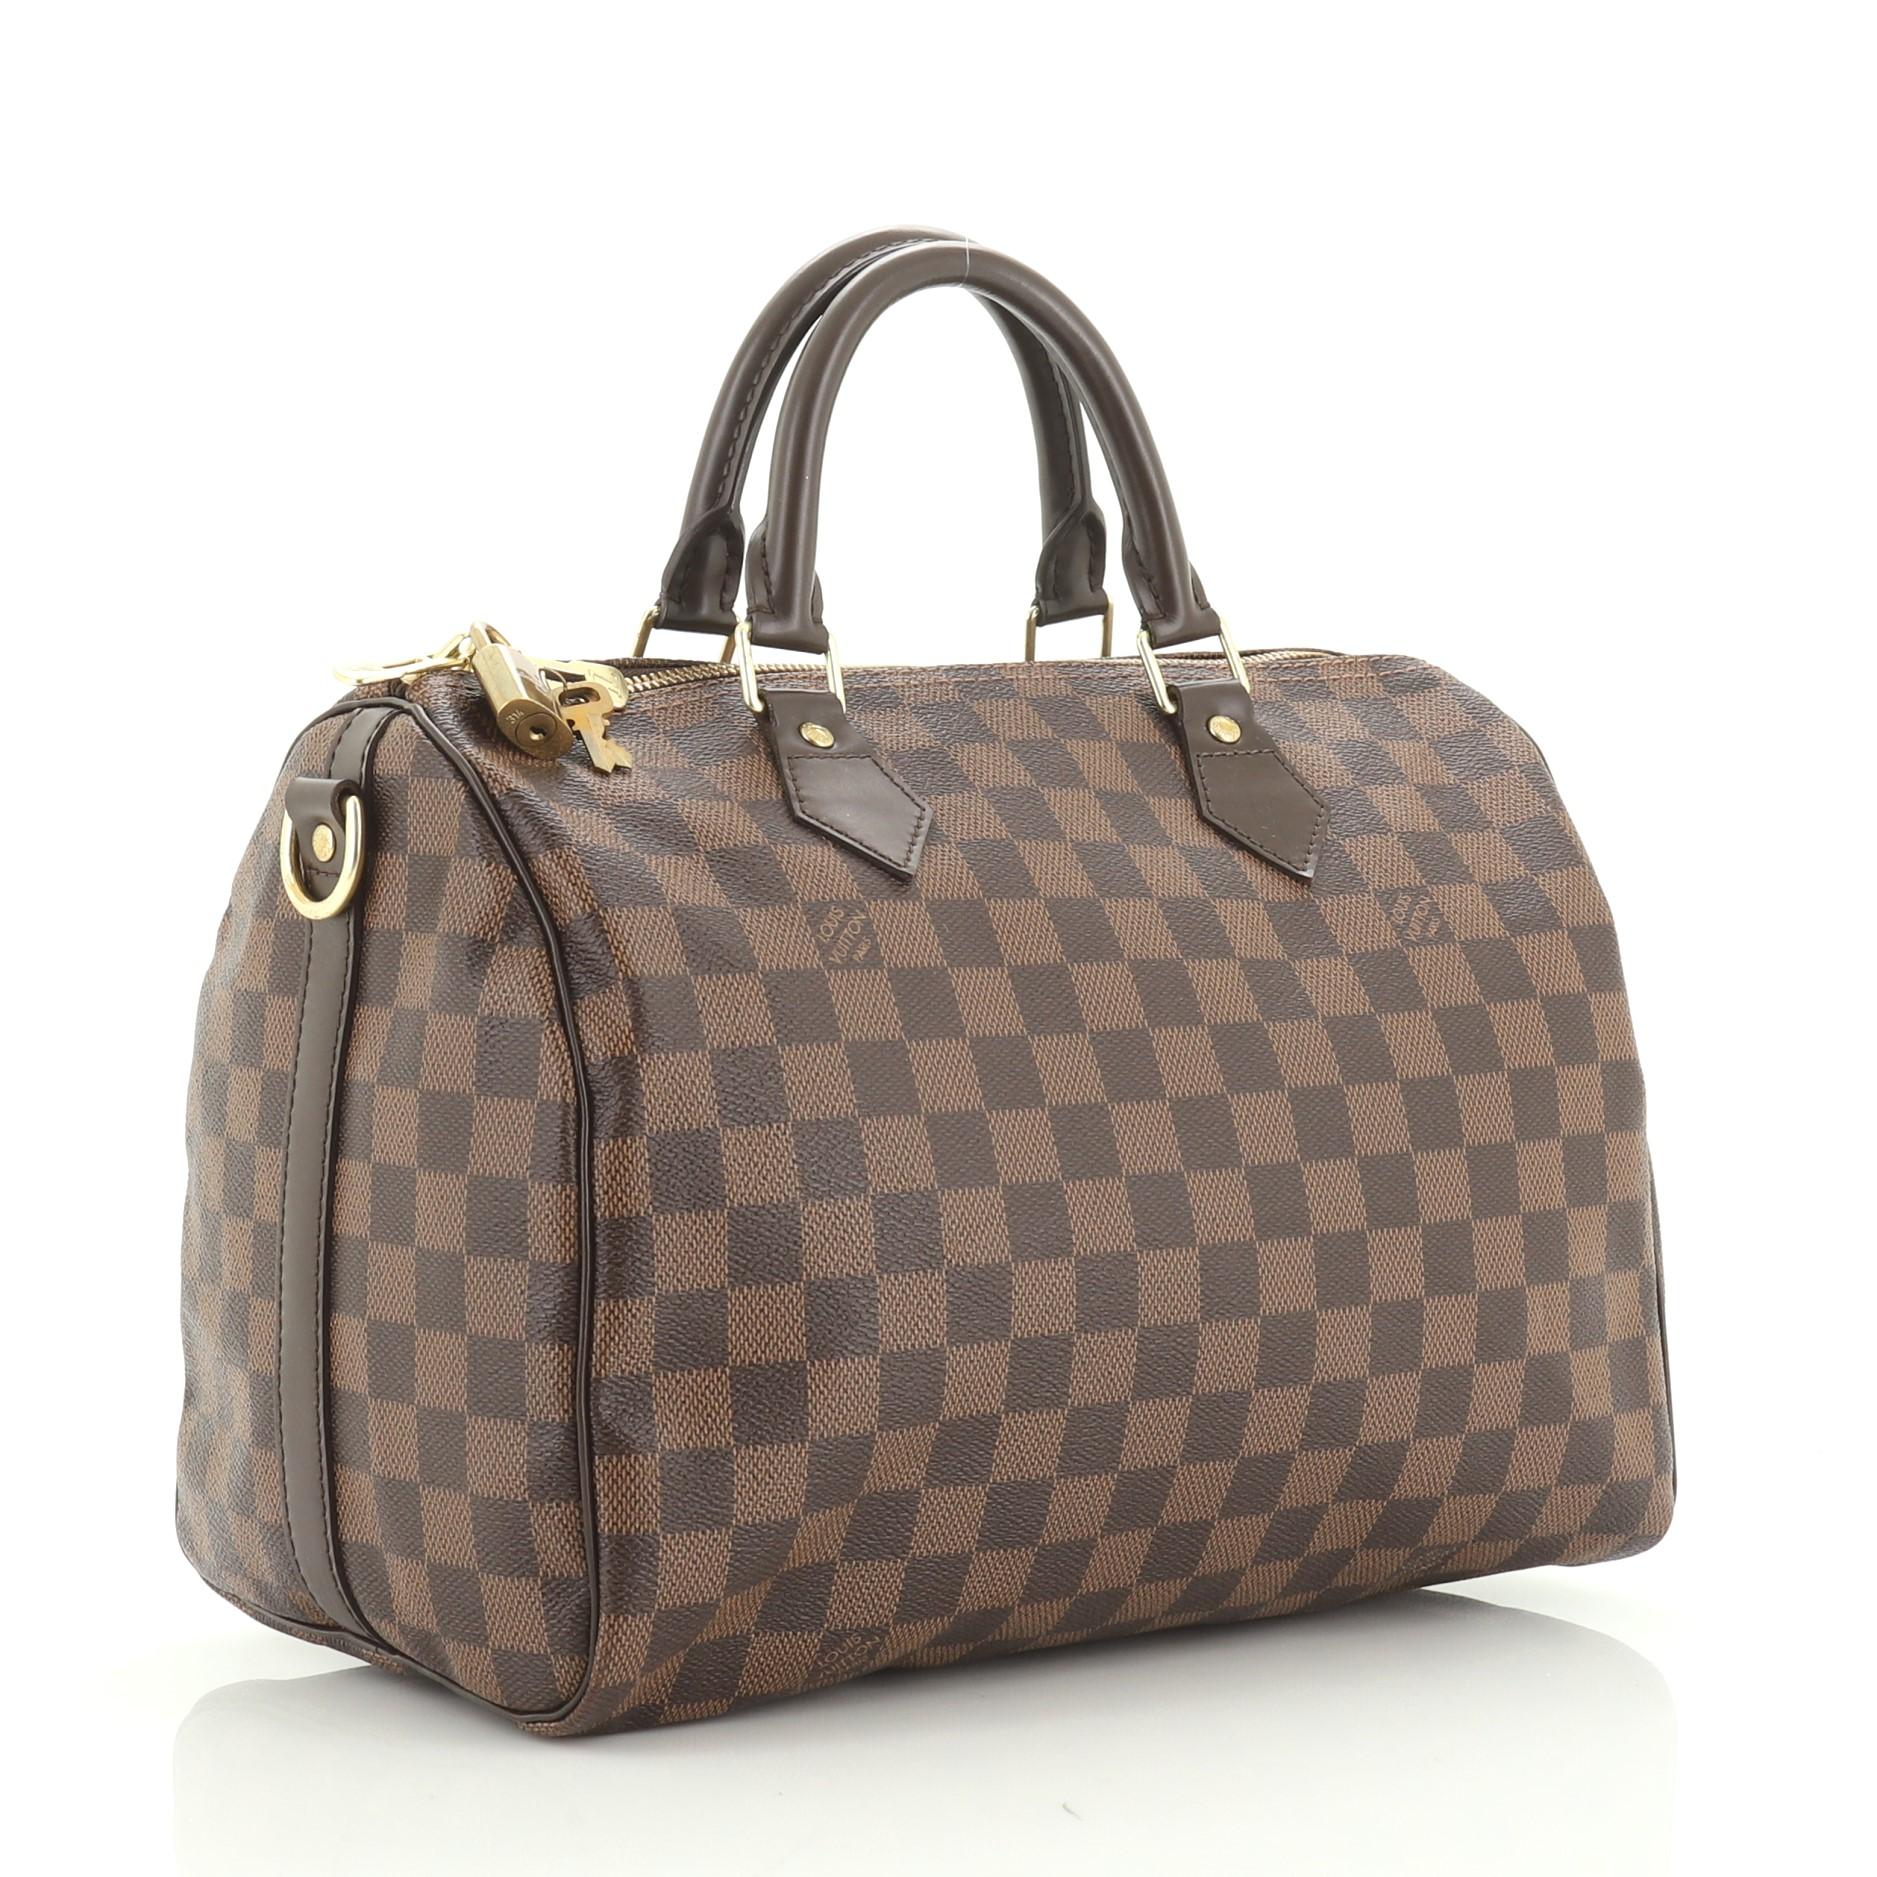 This Louis Vuitton Speedy Bandouliere Bag Damier 30, crafted in damier ebene coated canvas, features dual rolled handles, leather trim, and gold-tone hardware. Its zip closure opens to a red fabric interior with zip pocket. Authenticity code reads: